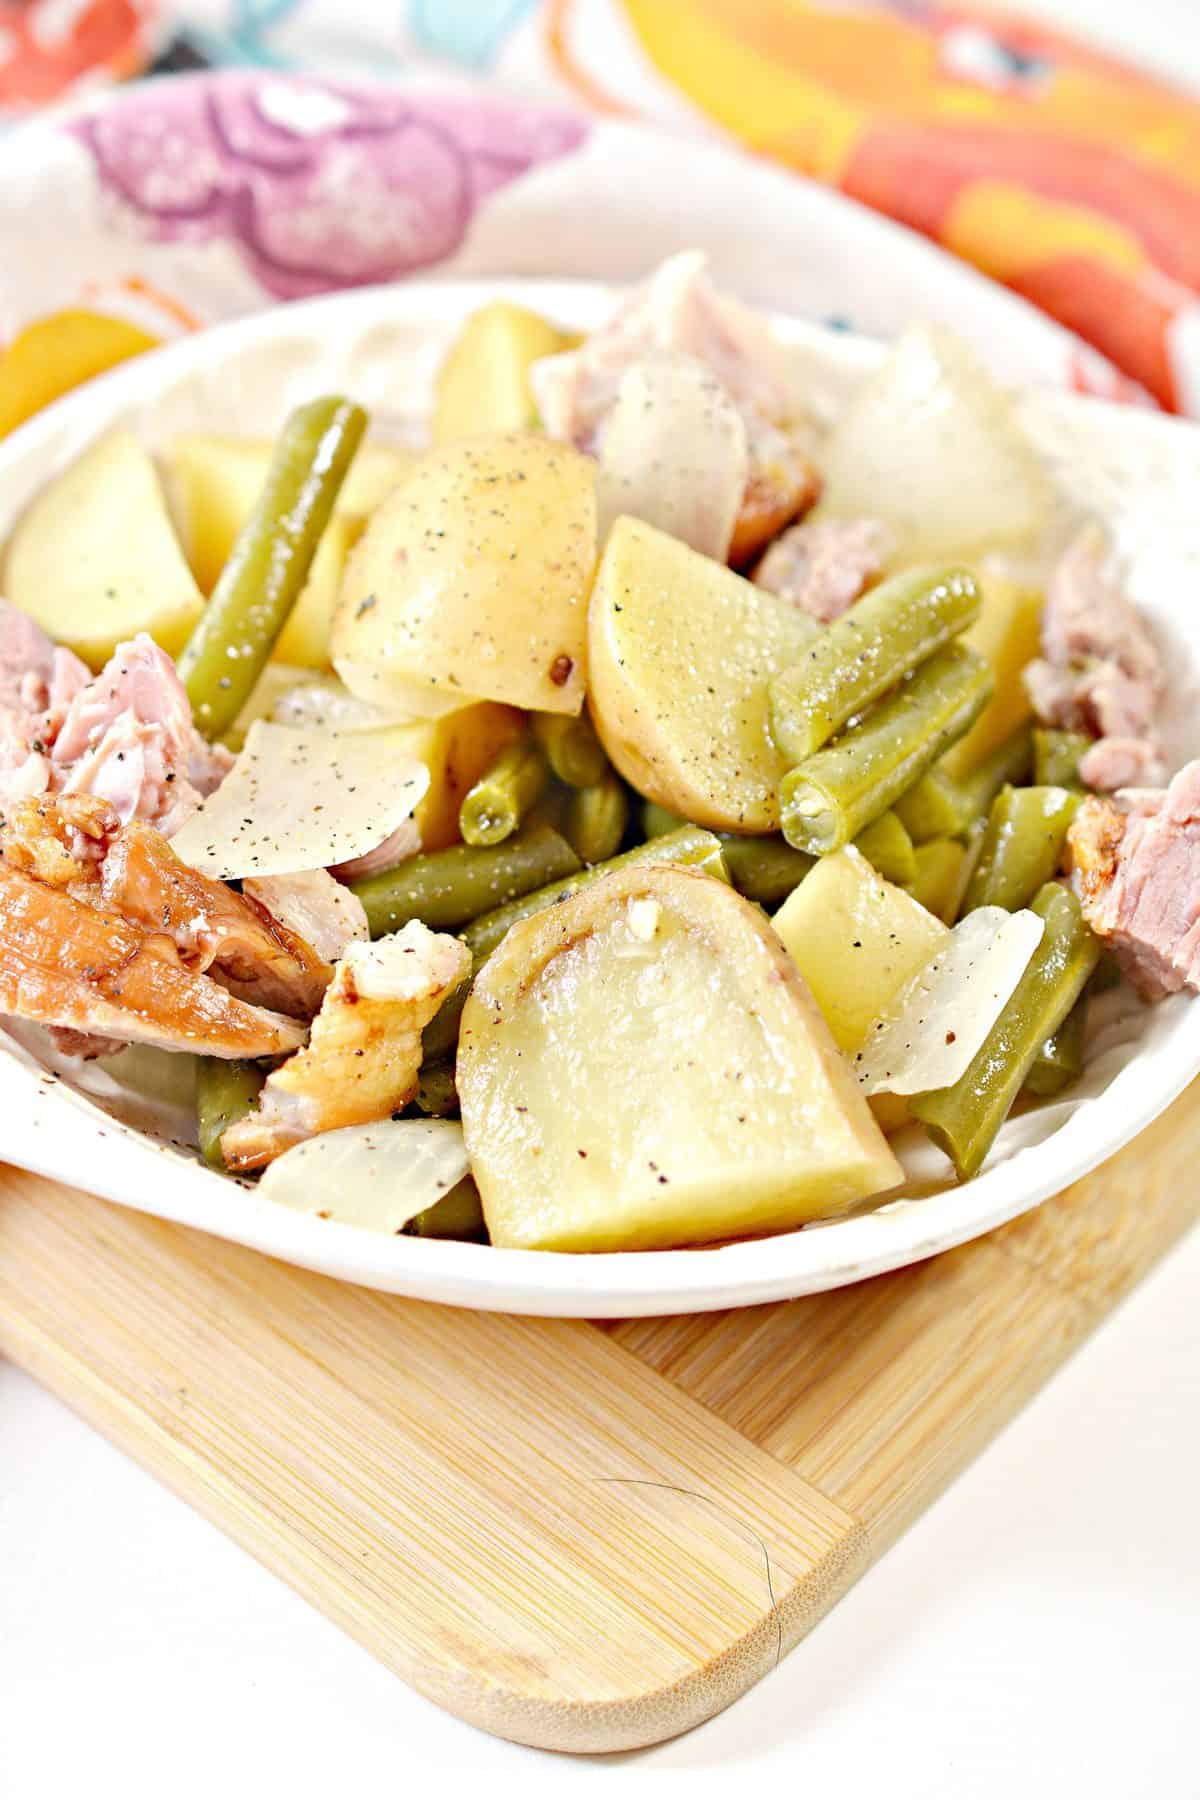 Slow Cooker Ham, Green Beans and Potatoes